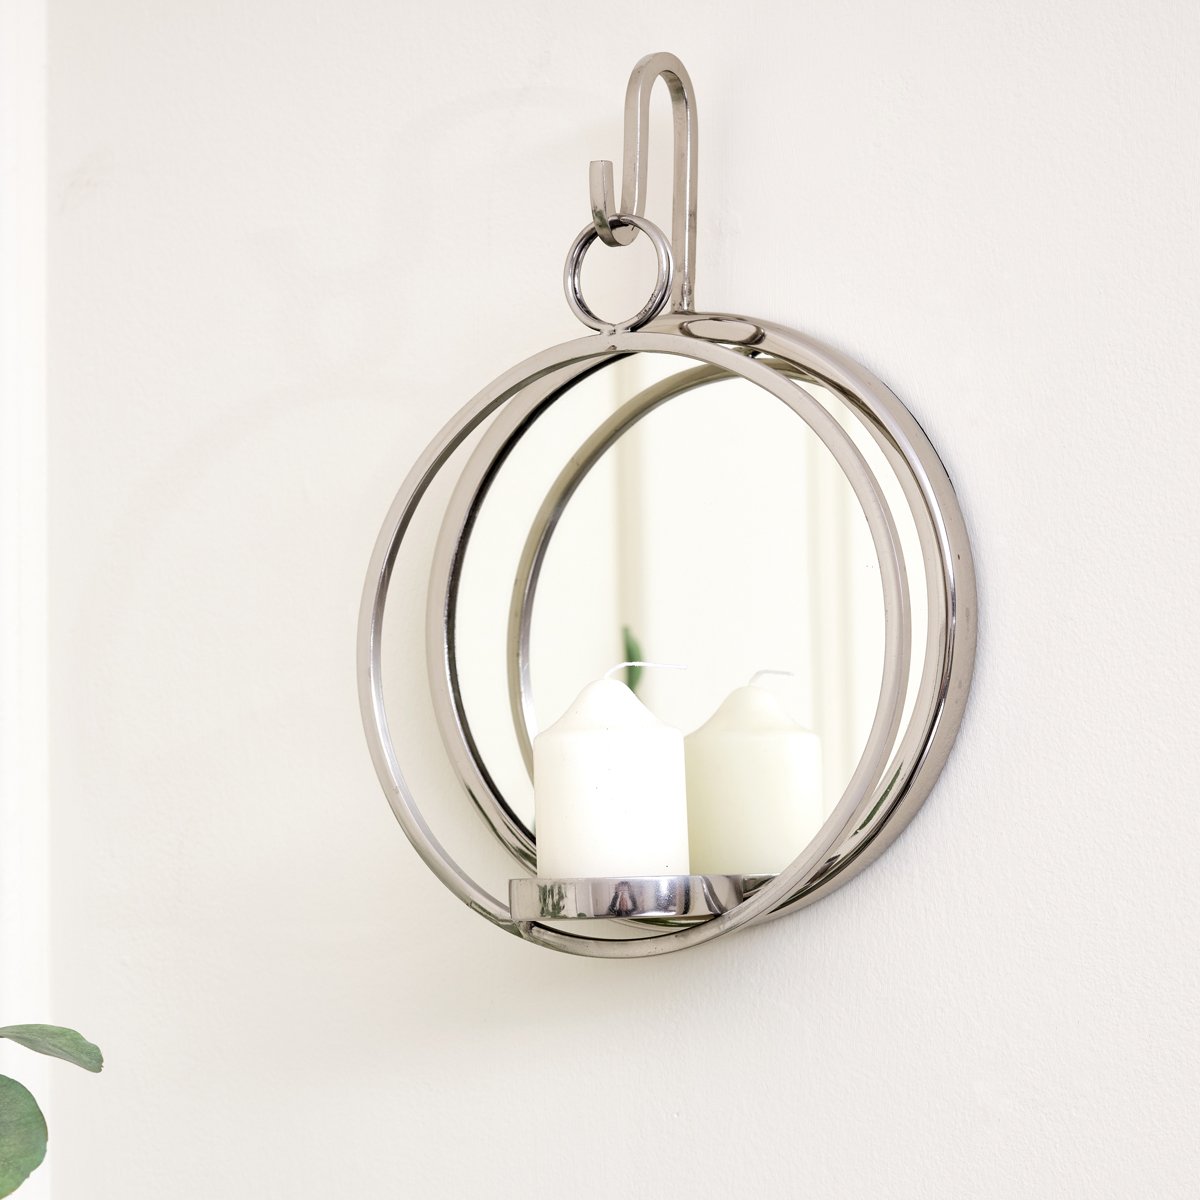 Round Silver Mirrored Wall Candle Sconce